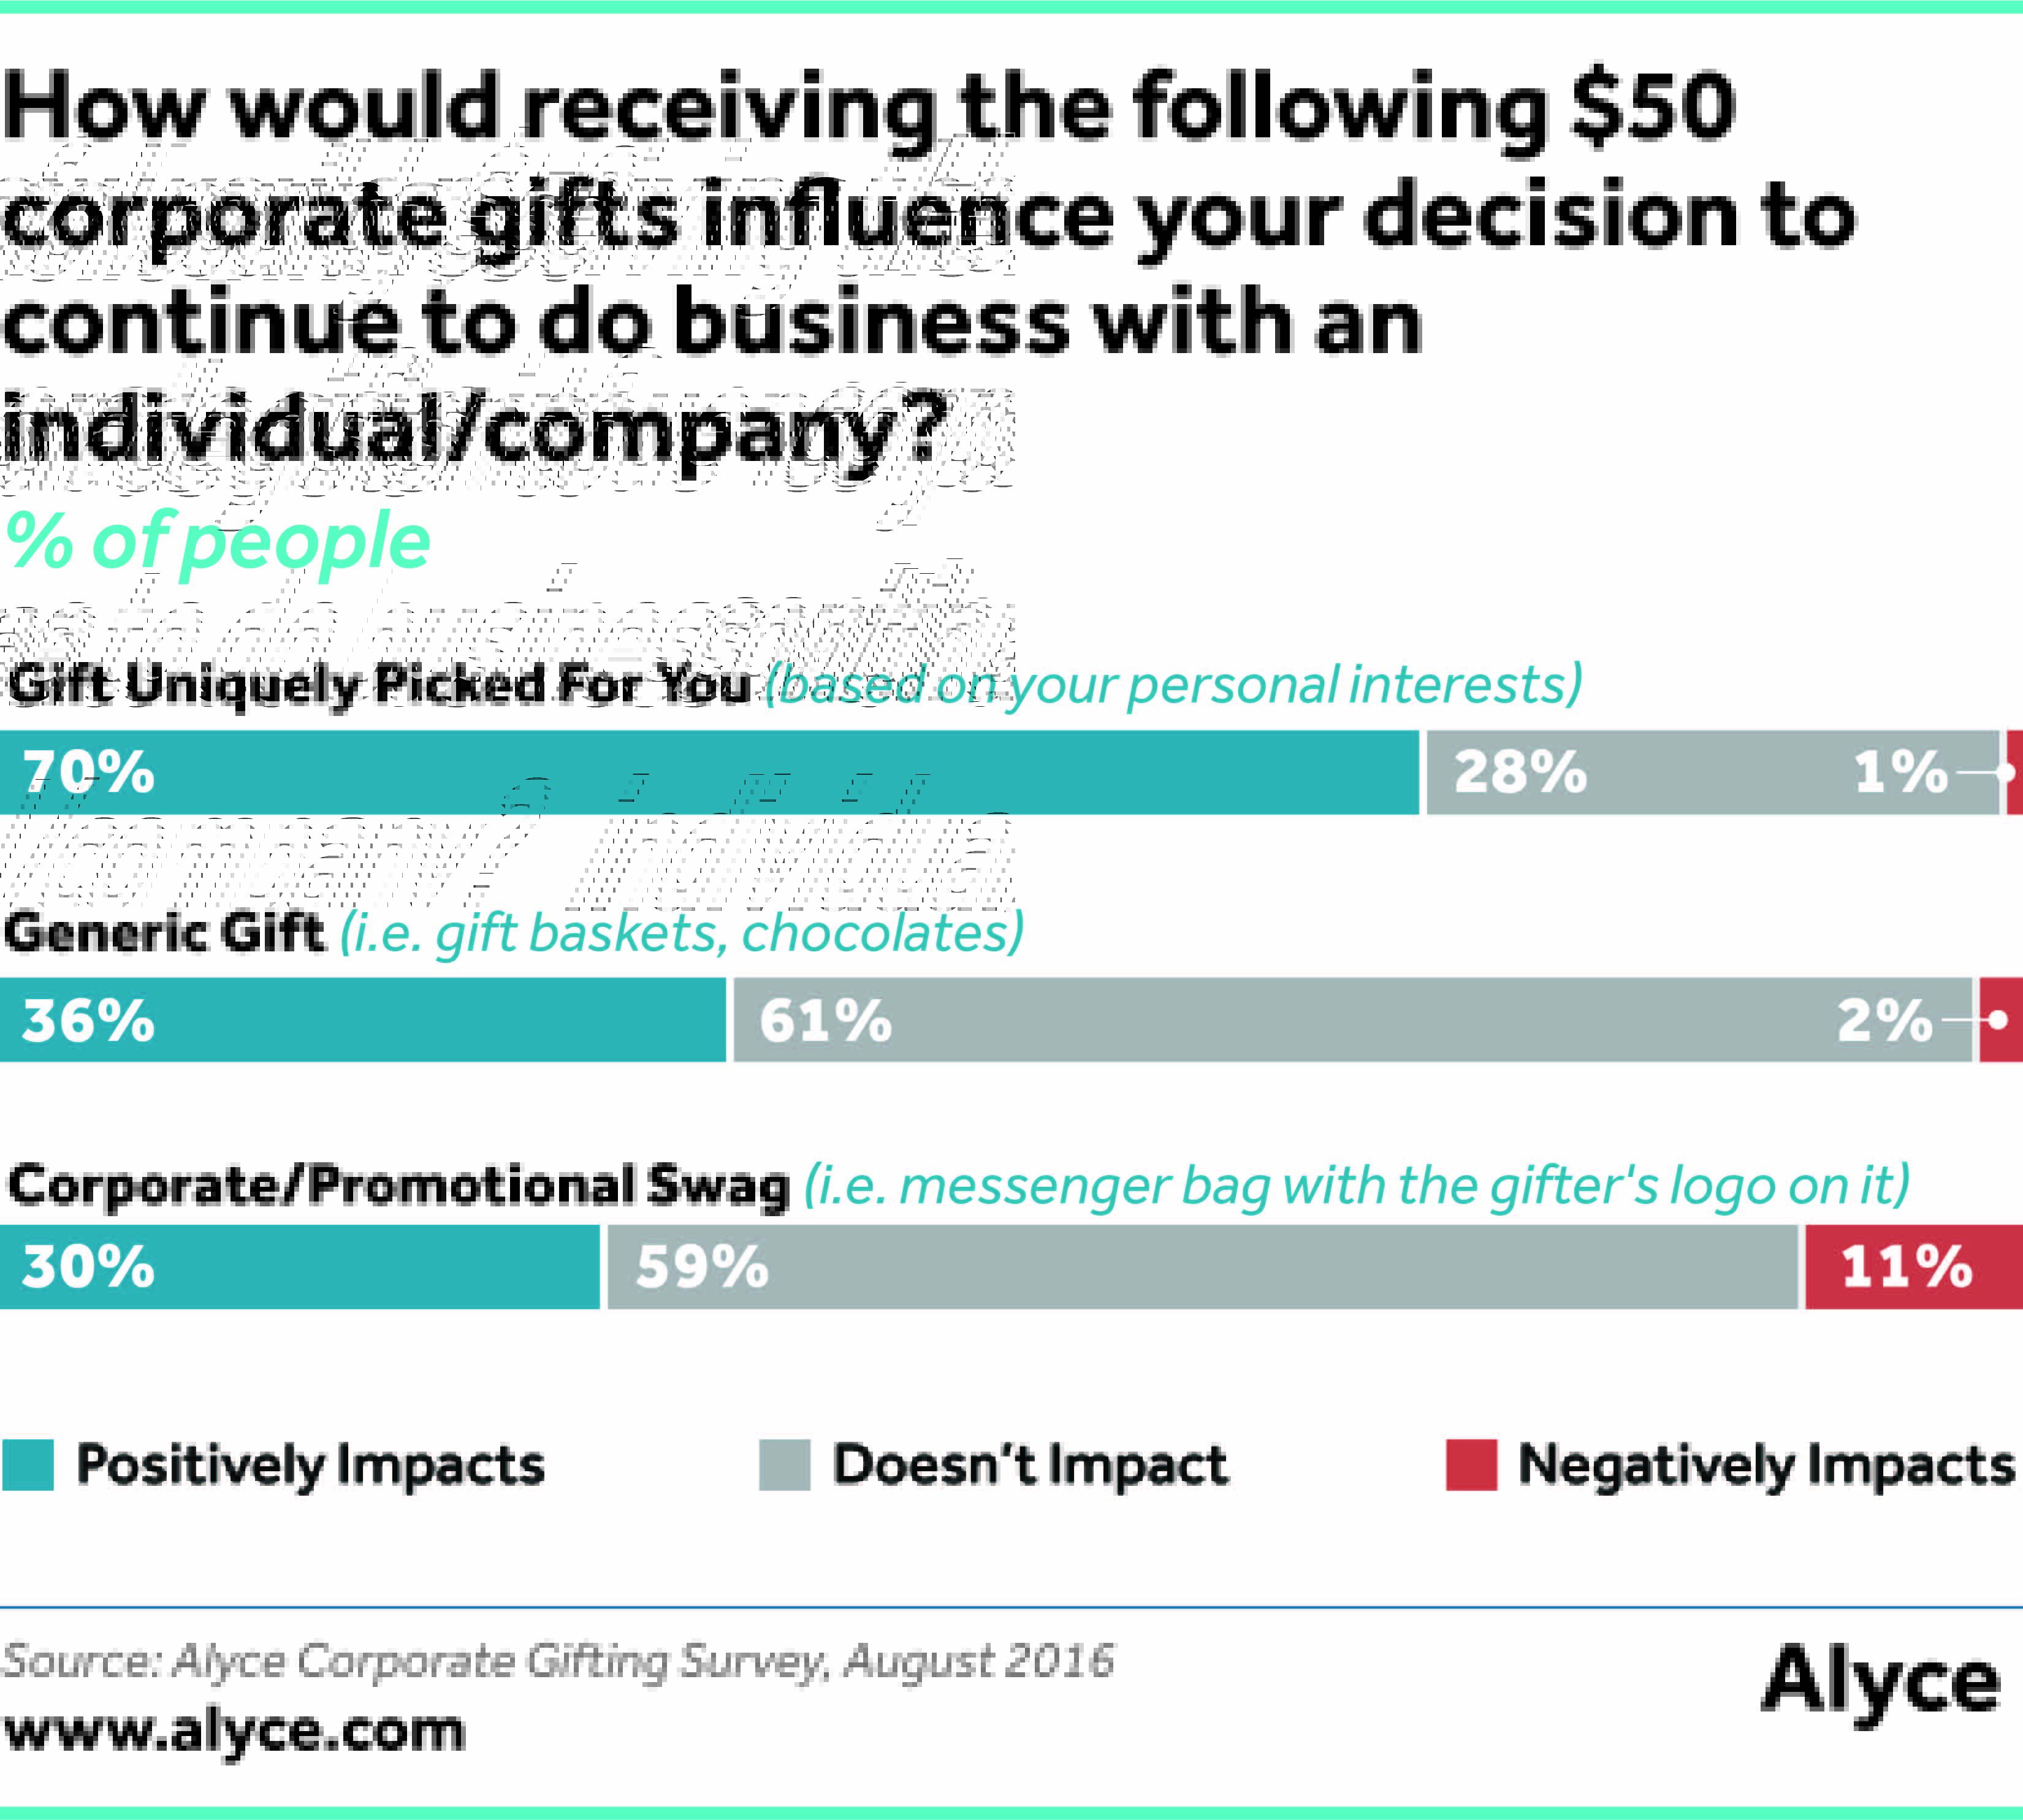 How would receiving the following $50 corporate gifts influence your decision to continue to do business (i.e. contract renewal, hire business again, renew subscription, etc.) with an individual/company?